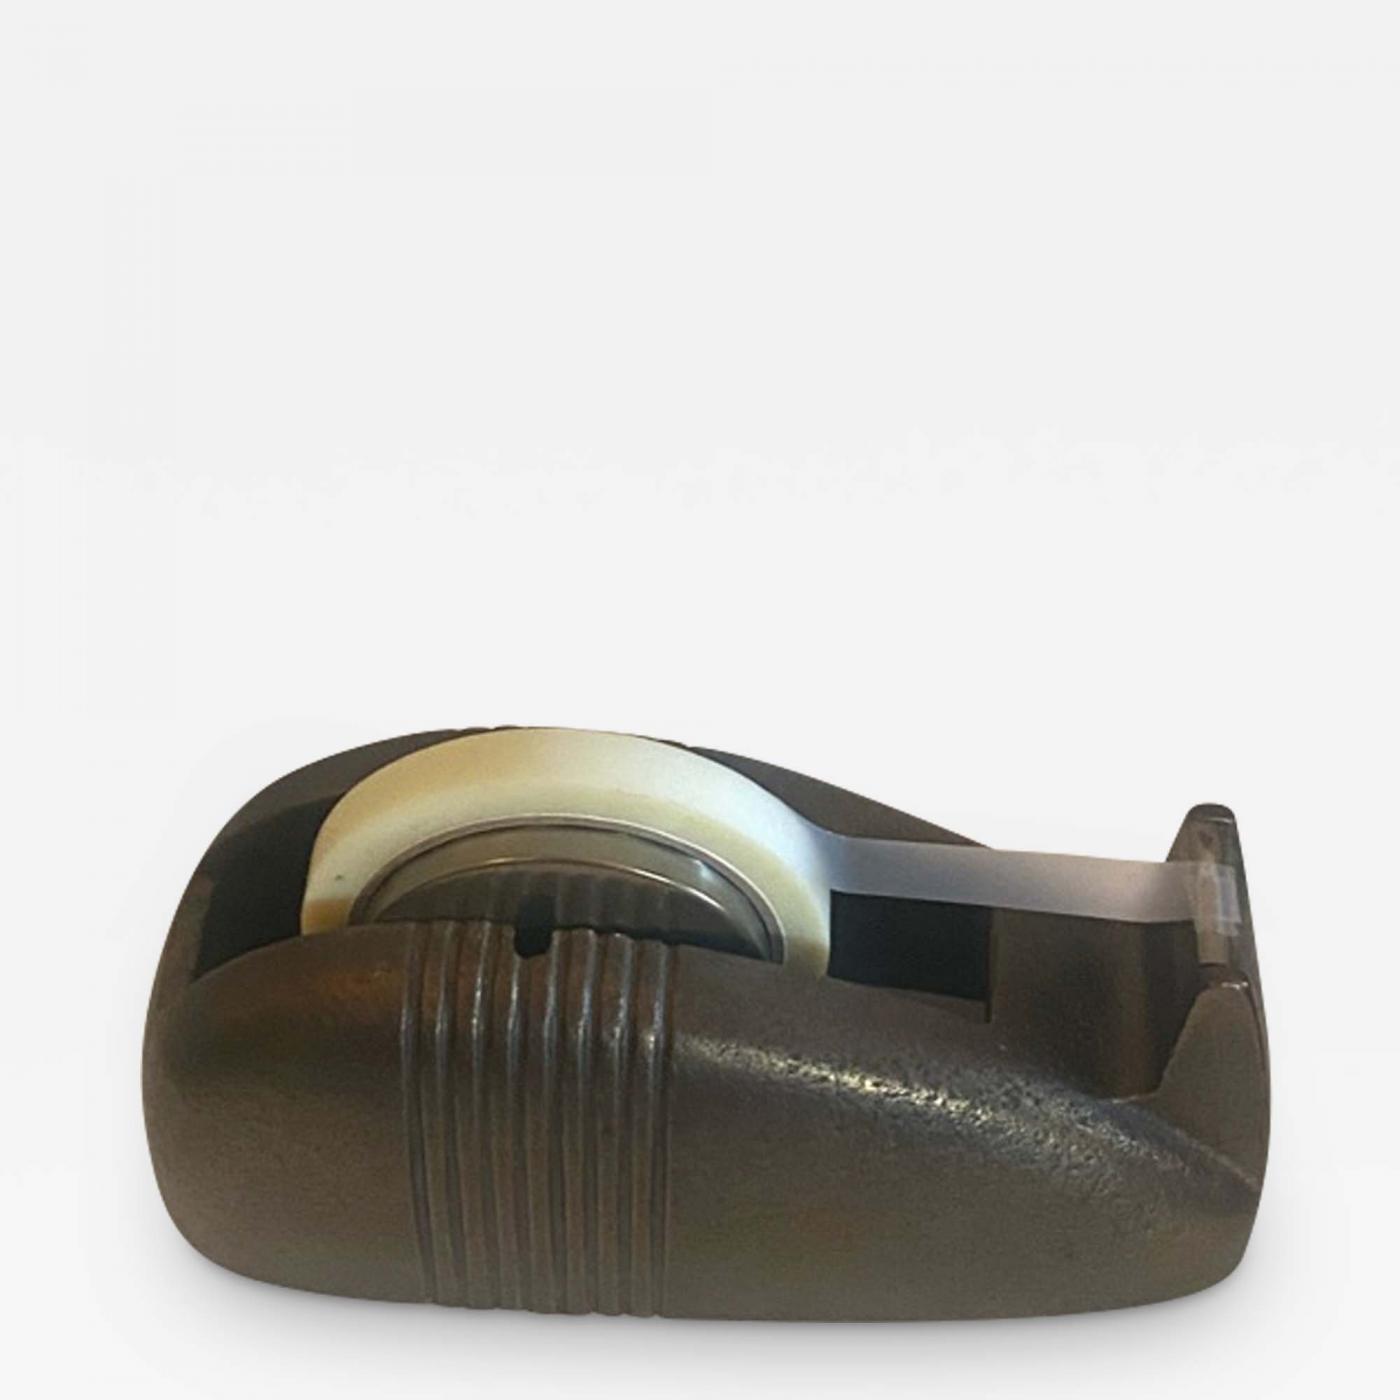 Modernist Industrial Style CNC Machined Solid Aluminum Tape Dispenser 